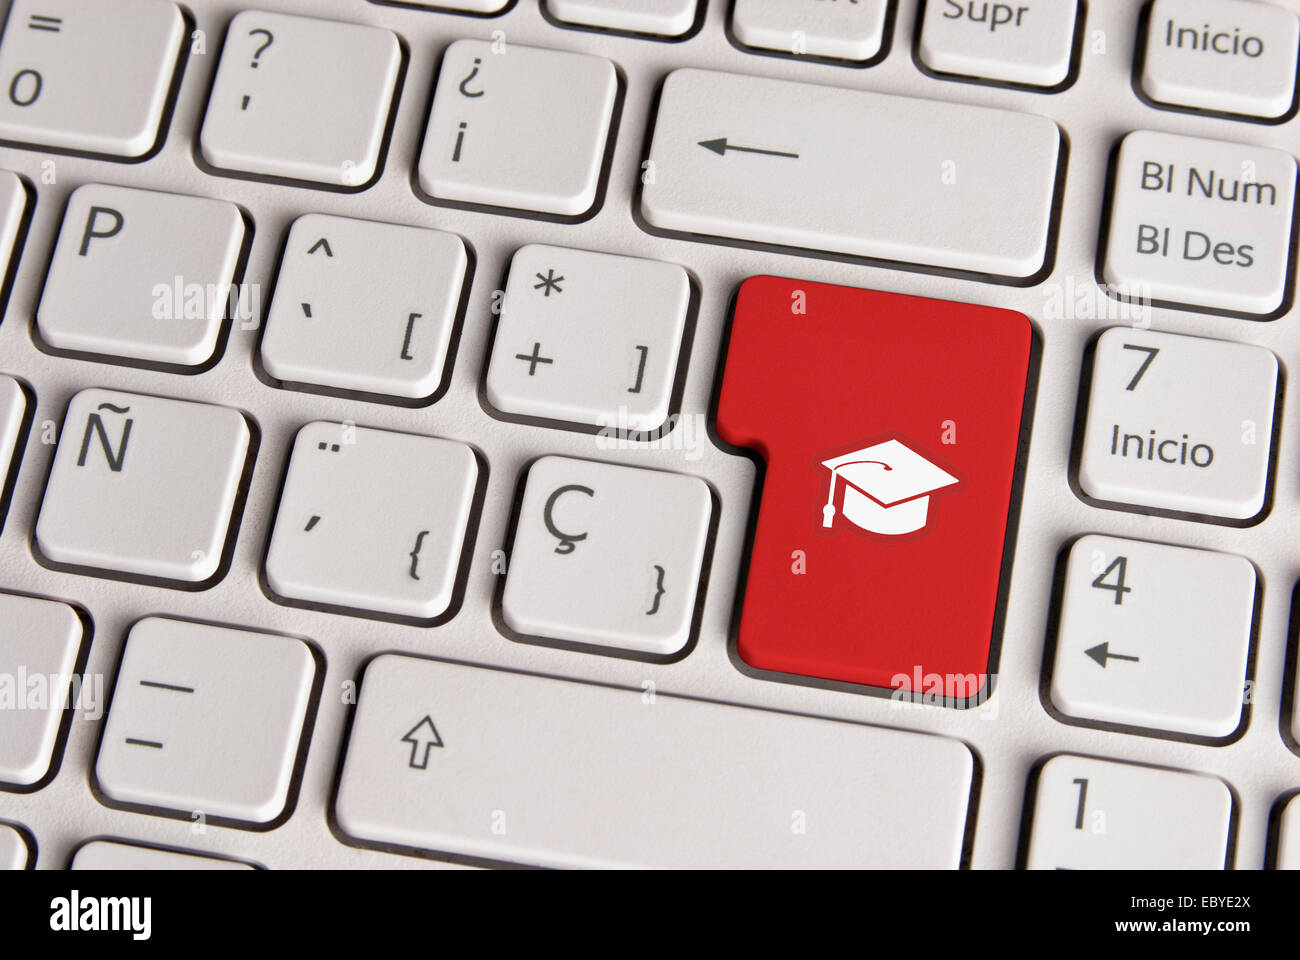 Spanish keyboard with education graduation hat icon over red background button.  Image with clipping path for easy change the ke Stock Photo